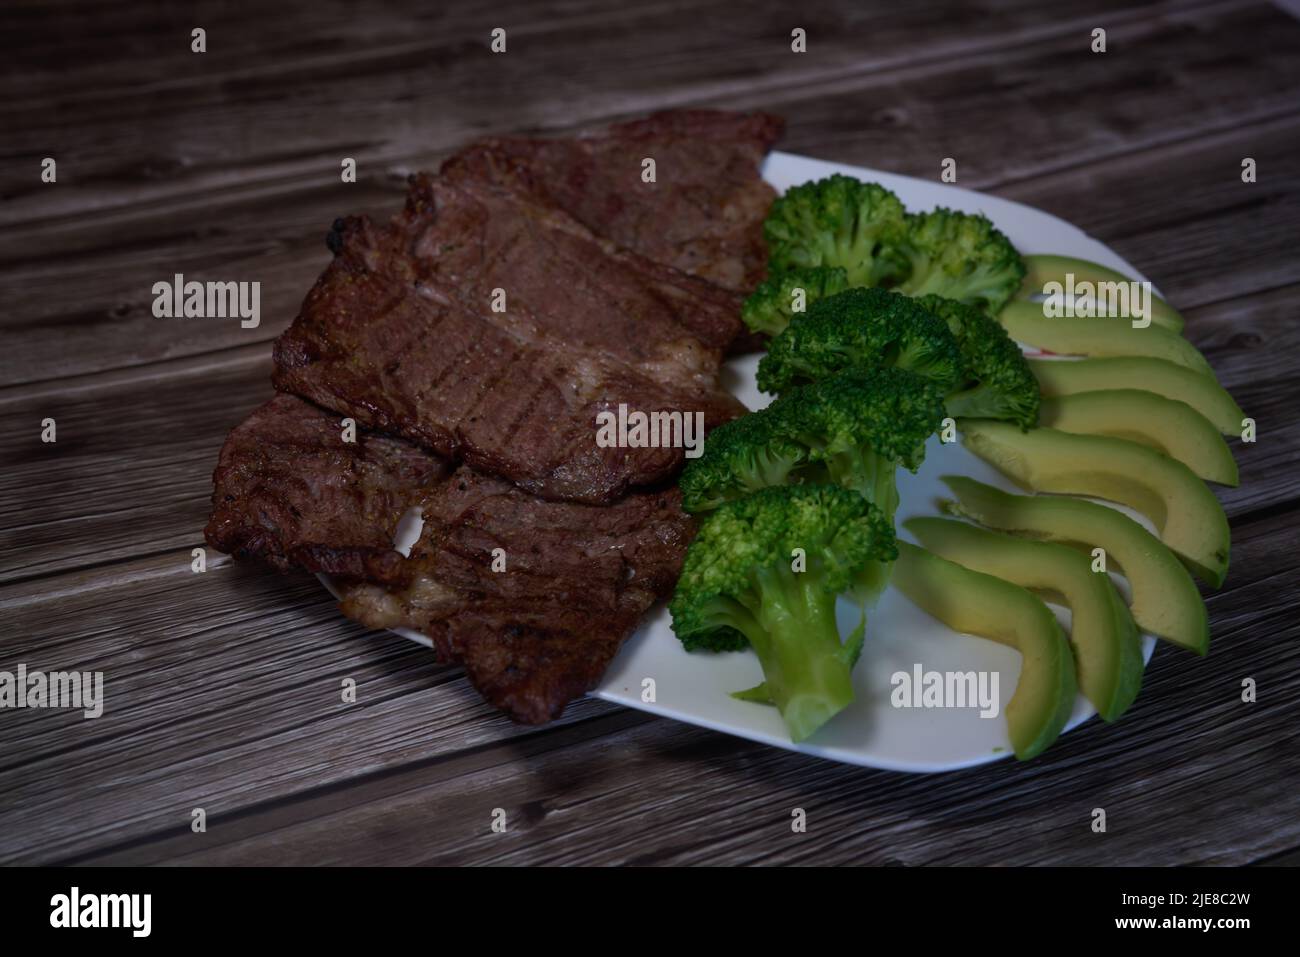 Keto diet based on beef steak, broccoli and avocado. High quality photo Stock Photo